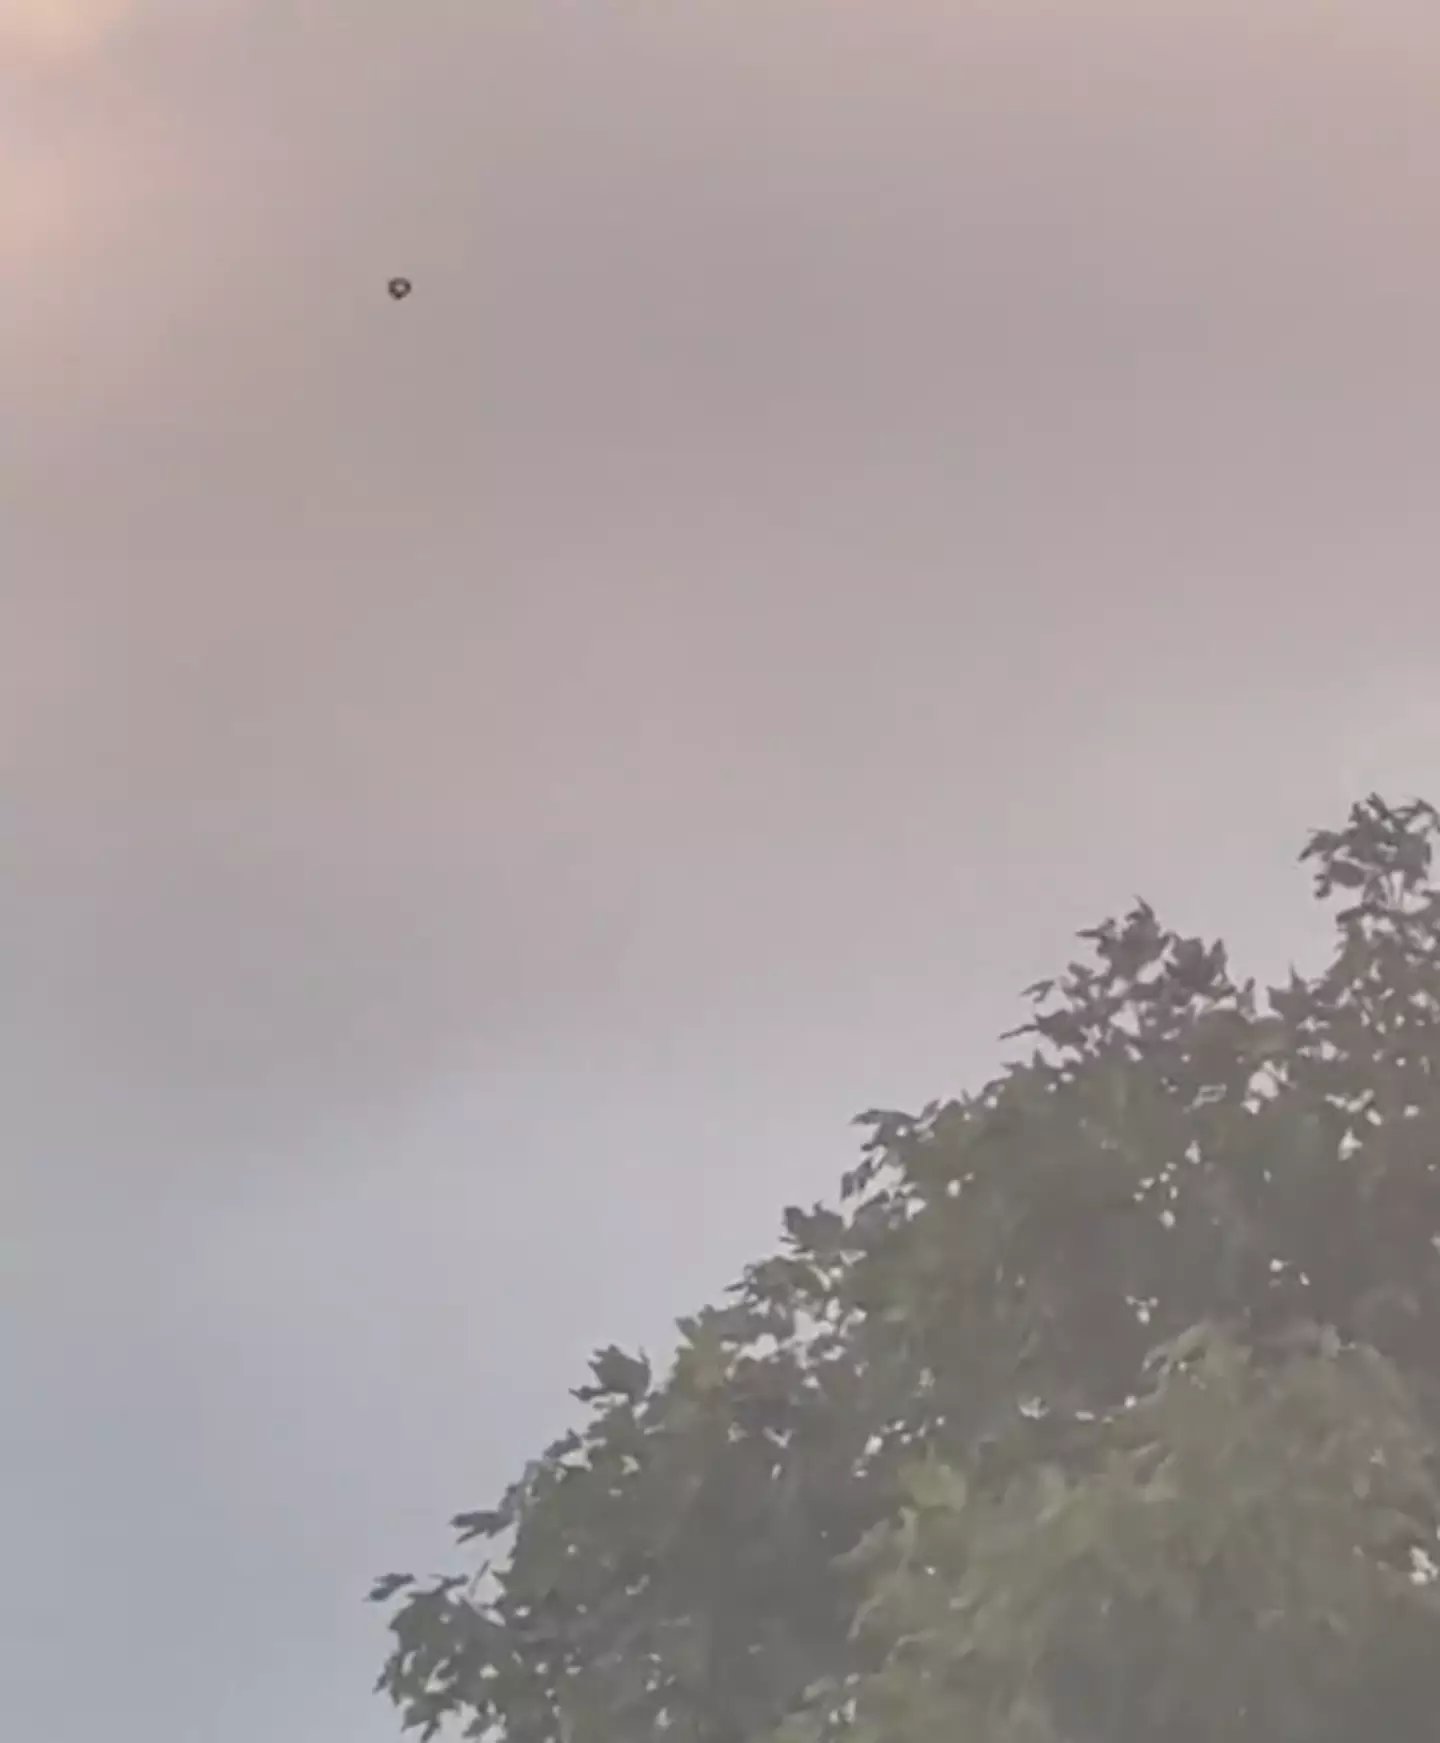 Is it a bird? Is it a plane? Well, according to some it's a UFO.